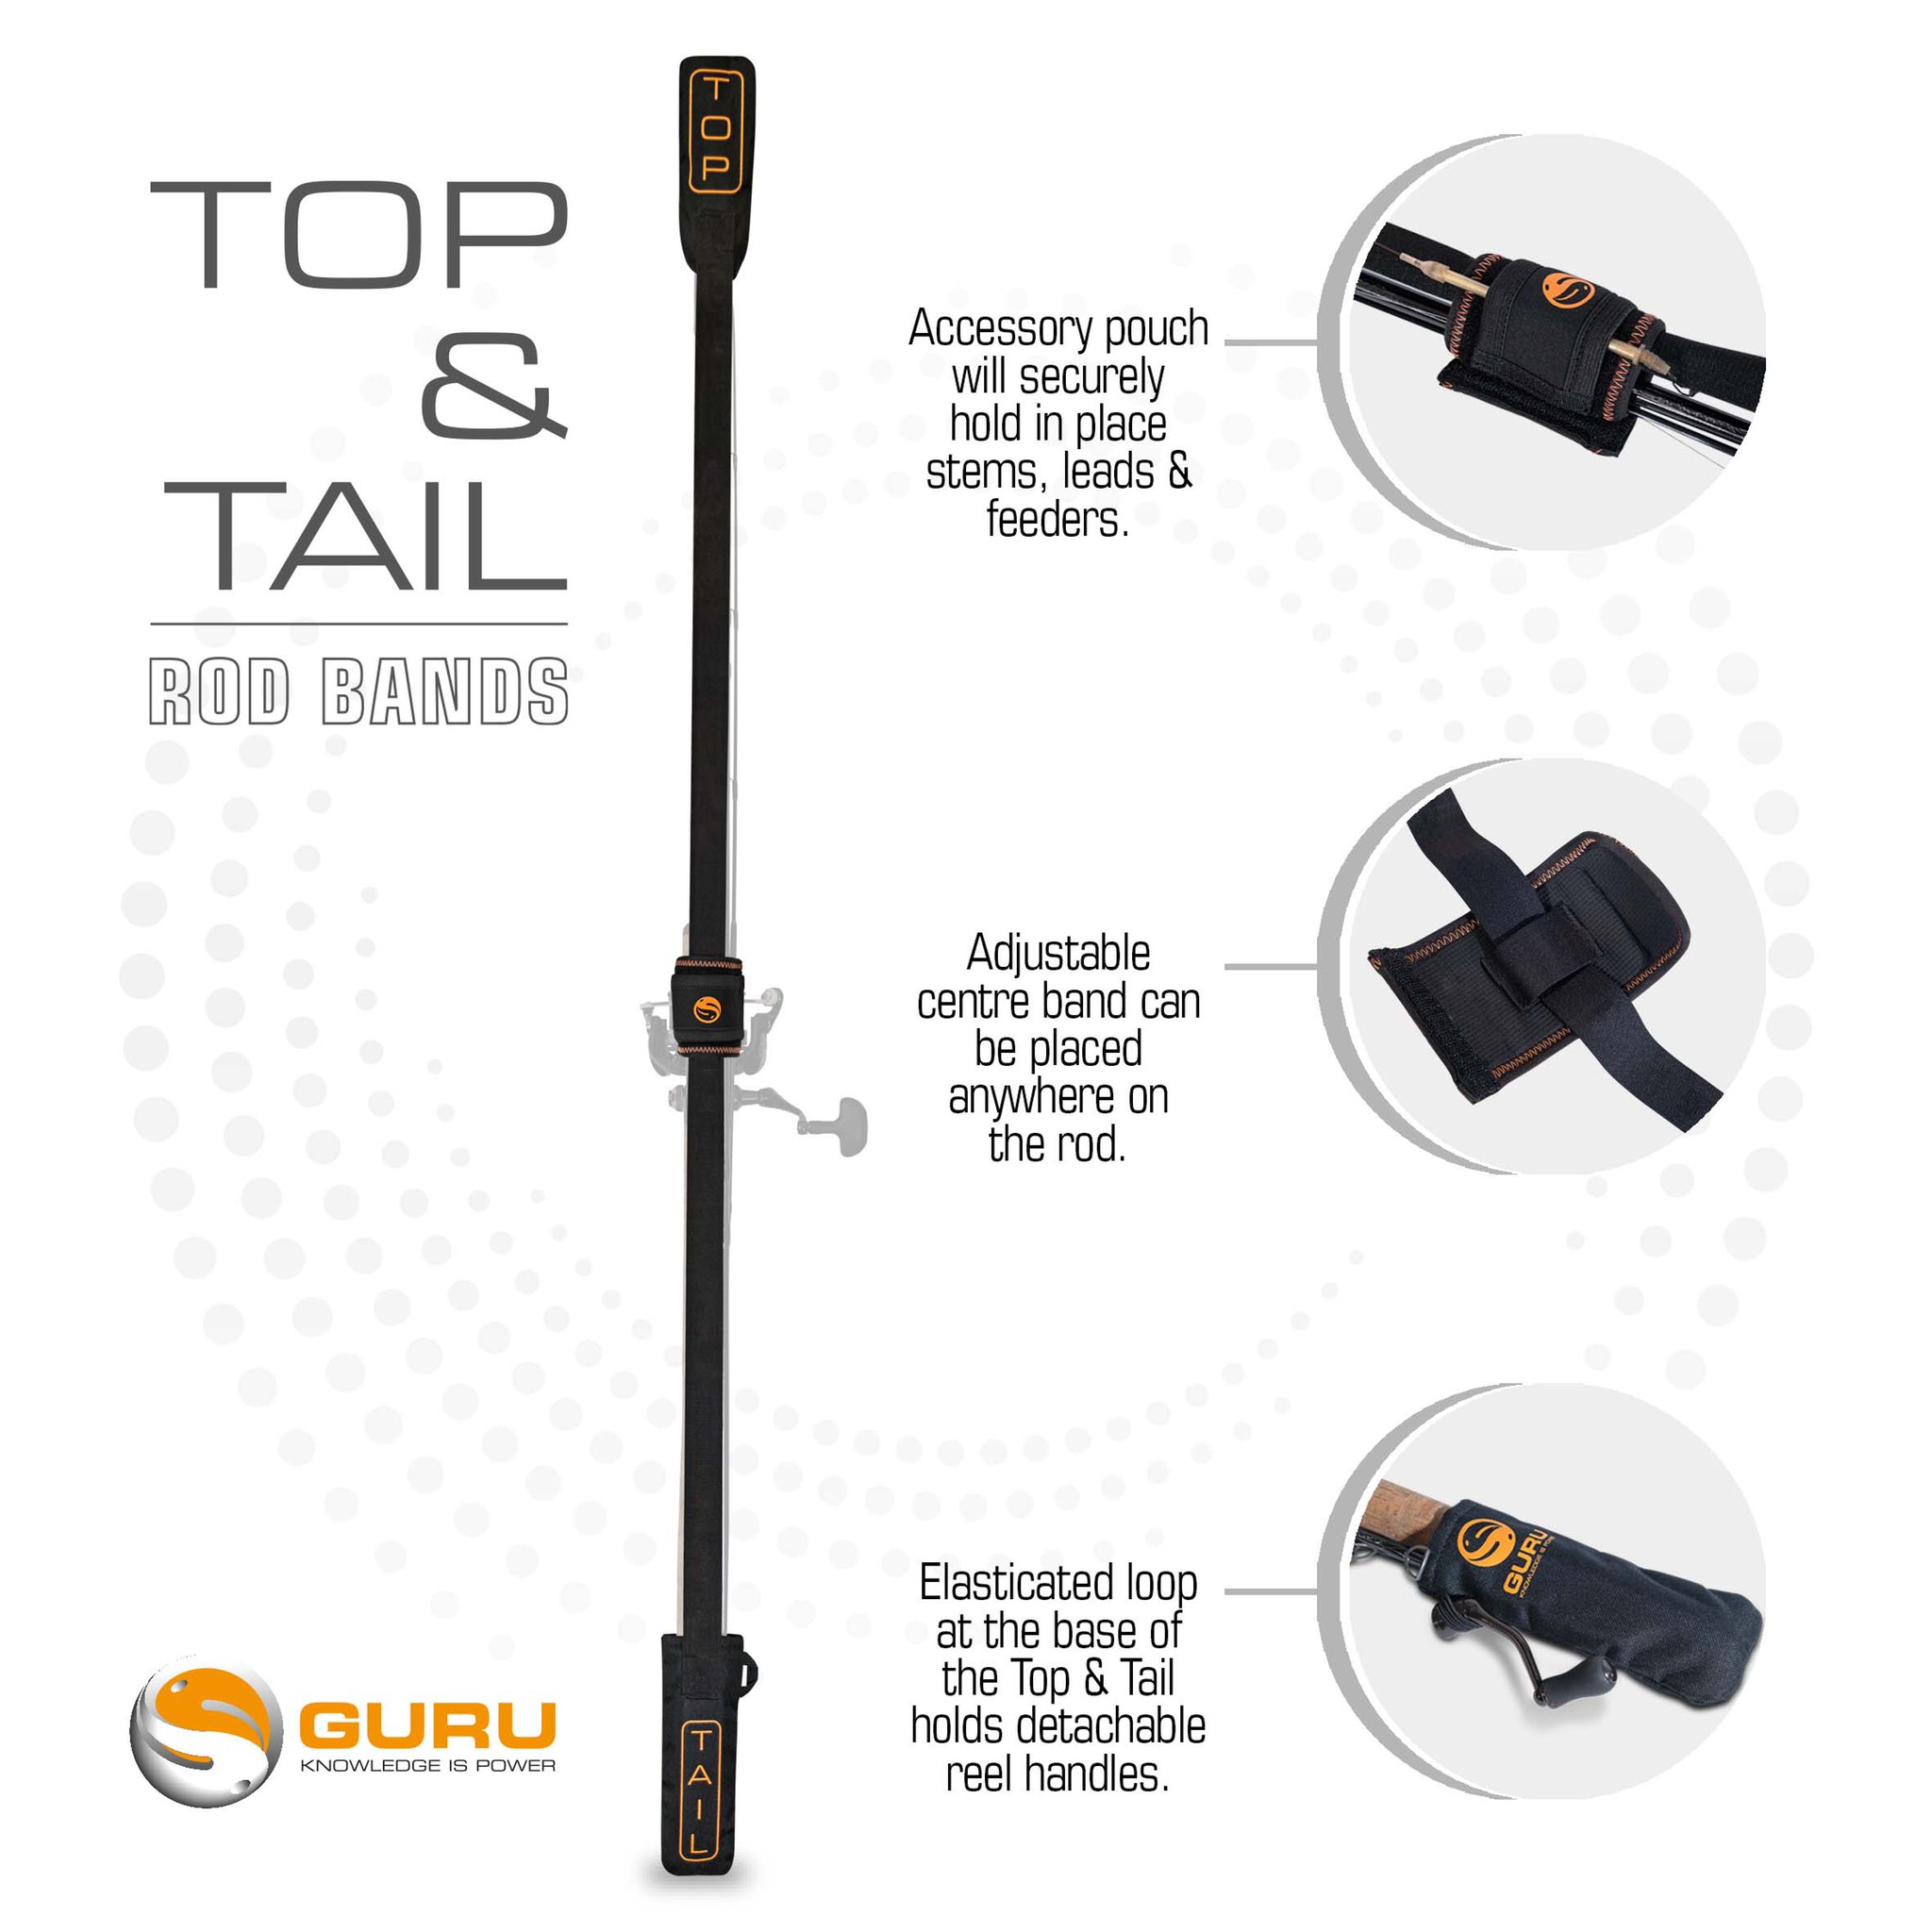 Team Guru on X: Top And Tail Rod Bands! 😎💪🏼 Making it simple, easy,  quick and super safe to store and transport ready made rods, saving anglers  time on the bank! 👌🏼🎣👍🏼